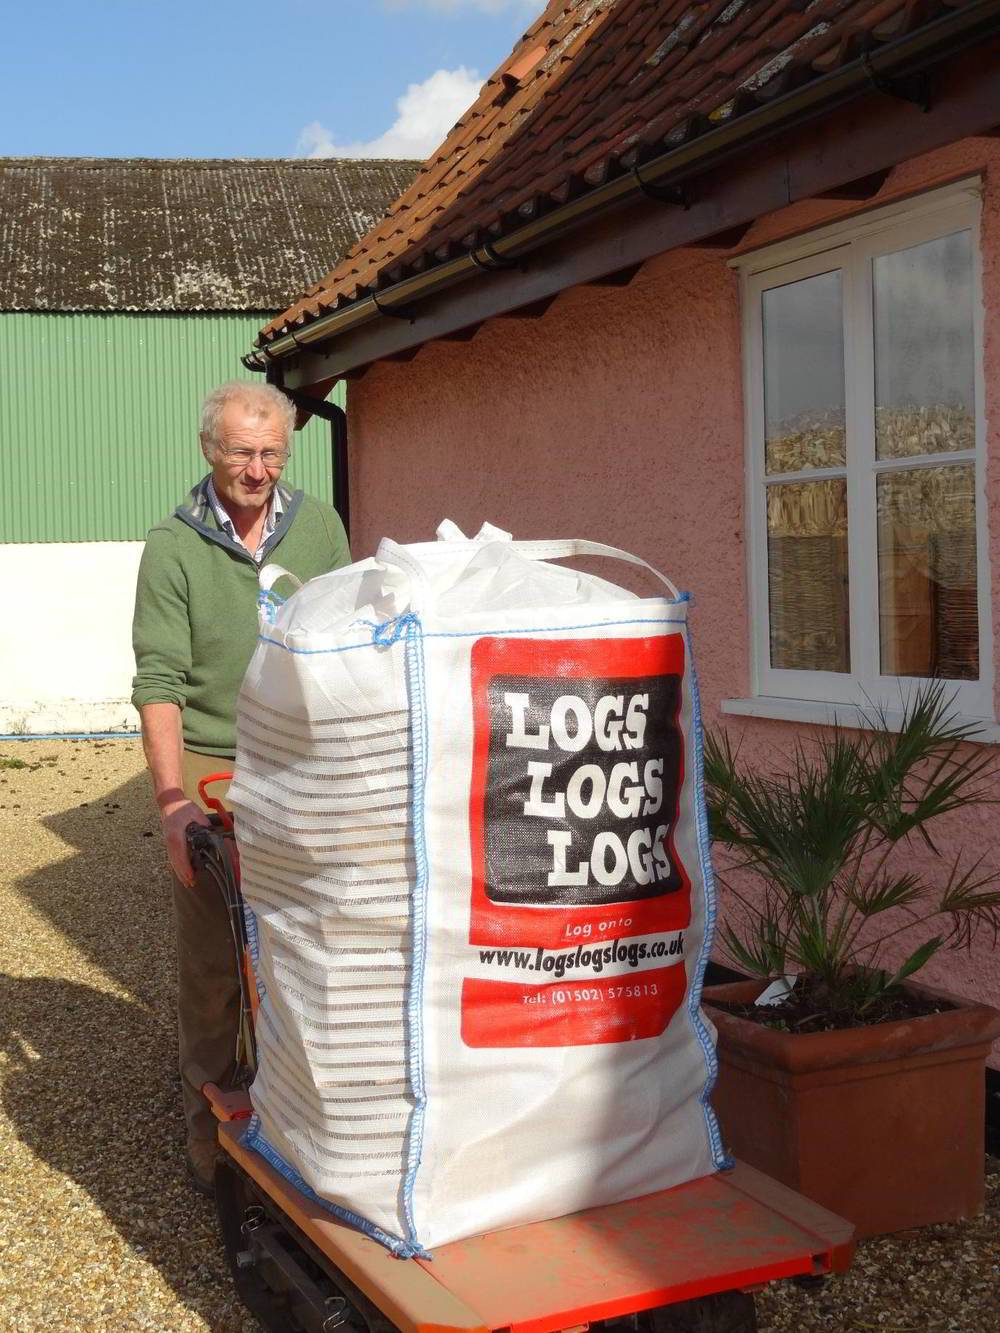 Small & medium bags can be moved on our log carrier into your garage, car port, back garden etc.